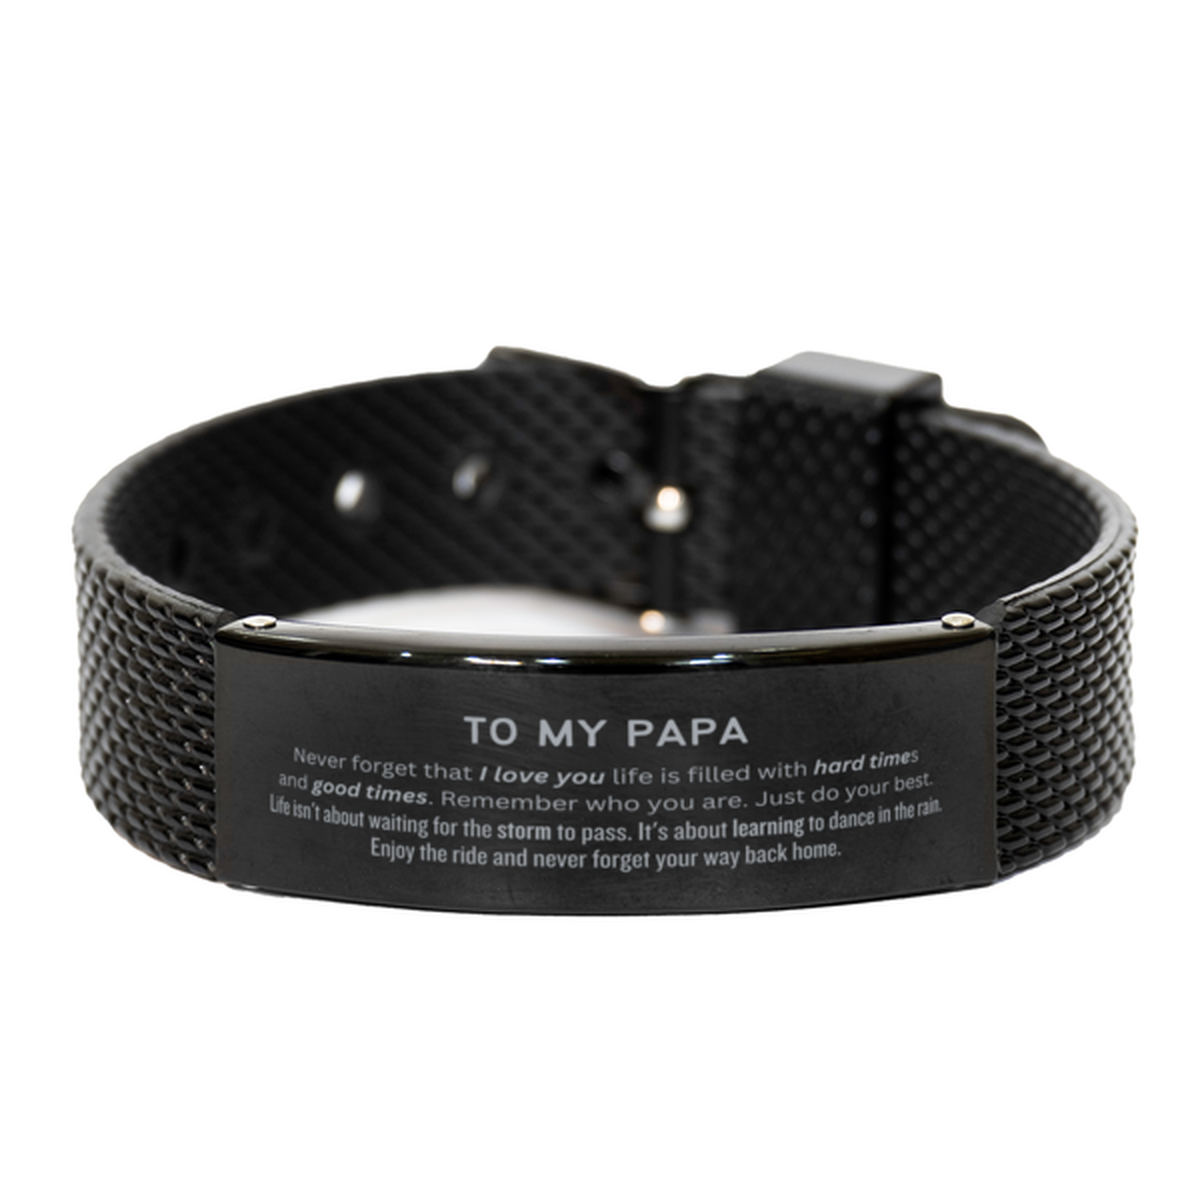 Christmas Papa Black Shark Mesh Bracelet Gifts, To My Papa Birthday Thank You Gifts For Papa, Graduation Unique Gifts For Papa To My Papa Never forget that I love you life is filled with hard times and good times. Remember who you are. Just do your best